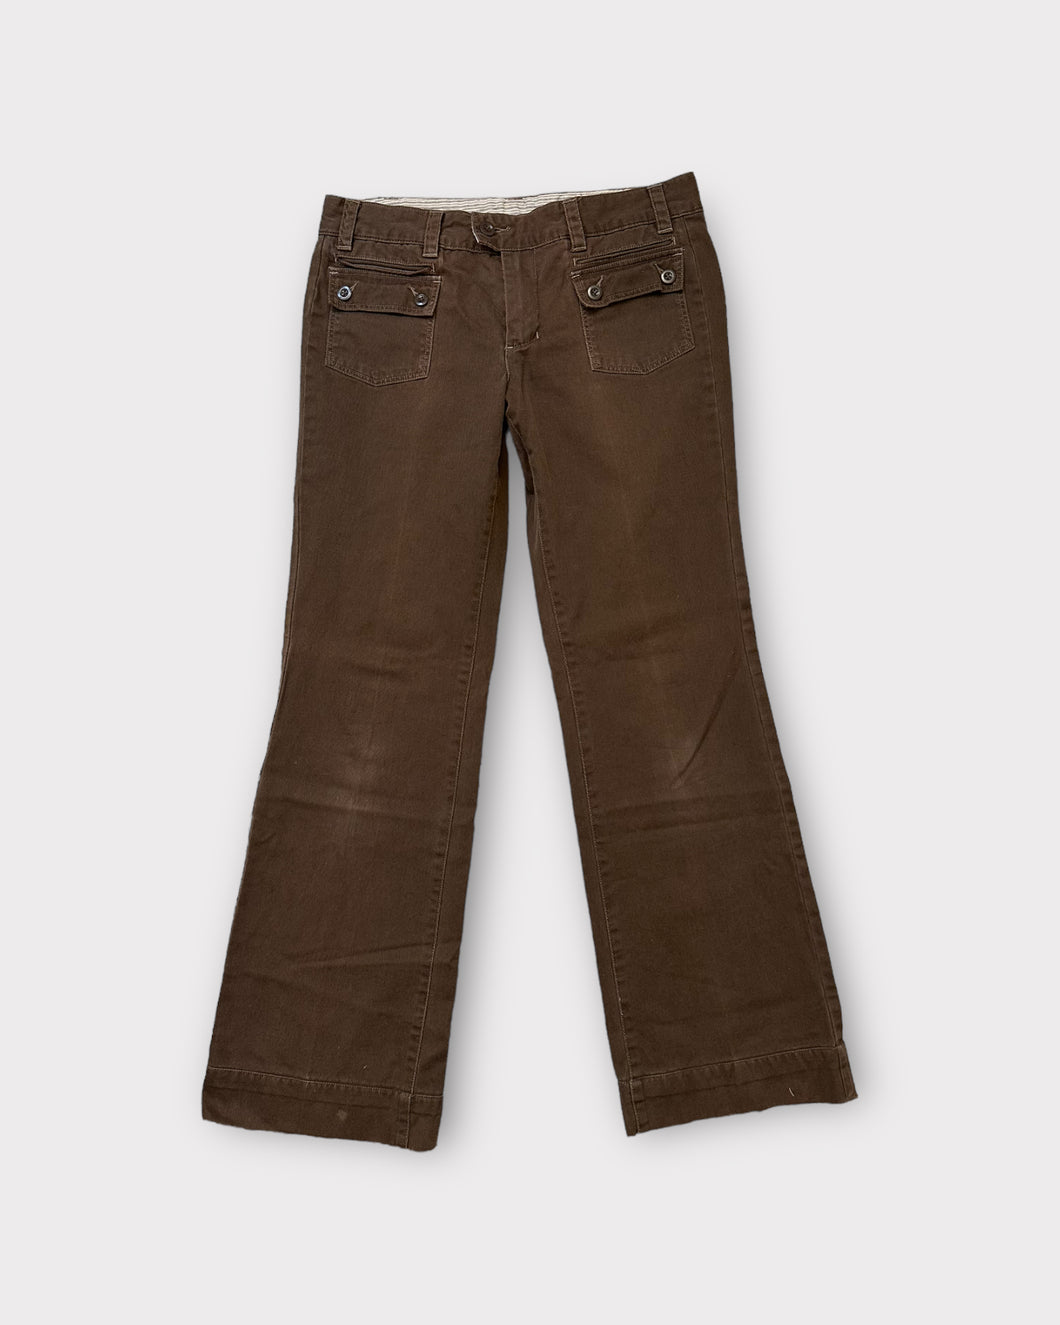 Anthropologie G1 Basic Goods Brown Low Rise Pants (6)